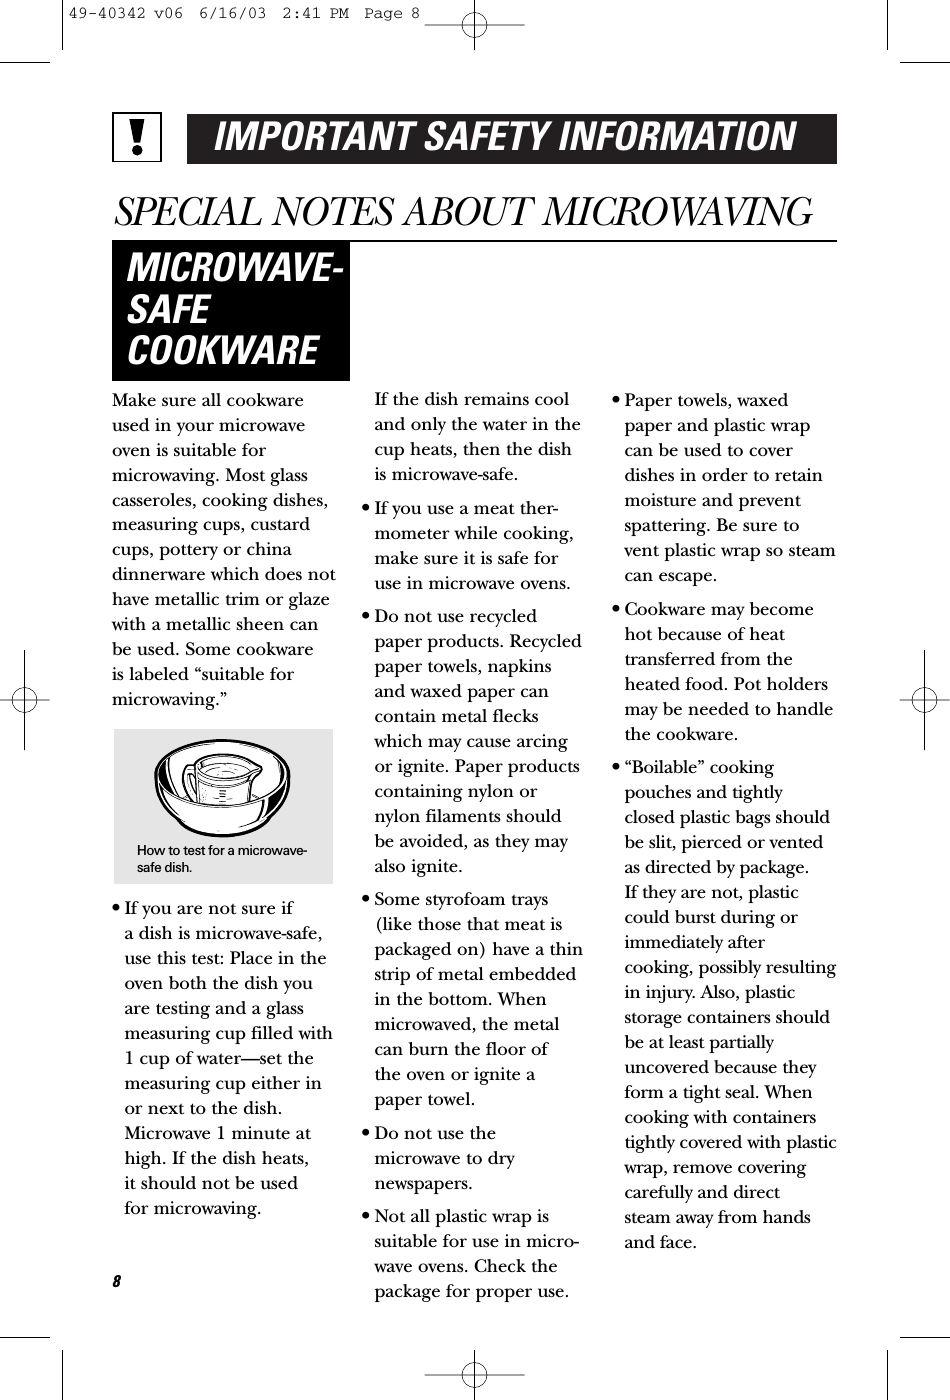 IMPORTANT SAFETY INFORMATIONSPECIAL NOTES ABOUT MICROWAVINGMake sure all cookwareused in your microwaveoven is suitable formicrowaving. Most glasscasseroles, cooking dishes,measuring cups, custardcups, pottery or chinadinnerware which does nothave metallic trim or glazewith a metallic sheen canbe used. Some cookware is labeled “suitable formicrowaving.”•If you are not sure if a dish is microwave-safe,use this test: Place in theoven both the dish youare testing and a glassmeasuring cup filled with1 cup of water—set themeasuring cup either inor next to the dish.Microwave 1 minute athigh. If the dish heats, it should not be used for microwaving. If the dish remains cooland only the water in thecup heats, then the dishis microwave-safe.•If you use a meat ther-mometer while cooking,make sure it is safe foruse in microwave ovens.•Do not use recycledpaper products. Recycledpaper towels, napkinsand waxed paper cancontain metal fleckswhich may cause arcingor ignite. Paper productscontaining nylon ornylon filaments shouldbe avoided, as they mayalso ignite. •Some styrofoam trays(like those that meat ispackaged on) have a thinstrip of metal embeddedin the bottom. Whenmicrowaved, the metalcan burn the floor of the oven or ignite apaper towel.•Do not use themicrowave to drynewspapers.•Not all plastic wrap issuitable for use in micro-wave ovens. Check thepackage for proper use.•Paper towels, waxedpaper and plastic wrapcan be used to coverdishes in order to retainmoisture and preventspattering. Be sure tovent plastic wrap so steamcan escape.•Cookware may becomehot because of heattransferred from theheated food. Pot holdersmay be needed to handlethe cookware.•“Boilable” cookingpouches and tightlyclosed plastic bags shouldbe slit, pierced or ventedas directed by package. If they are not, plasticcould burst during orimmediately aftercooking, possibly resultingin injury. Also, plasticstorage containers shouldbe at least partiallyuncovered because theyform a tight seal. Whencooking with containerstightly covered with plasticwrap, remove coveringcarefully and direct steam away from handsand face.MICROWAVE-SAFECOOKWARE8How to test for a microwave-safe dish.49-40342 v06  6/16/03  2:41 PM  Page 8